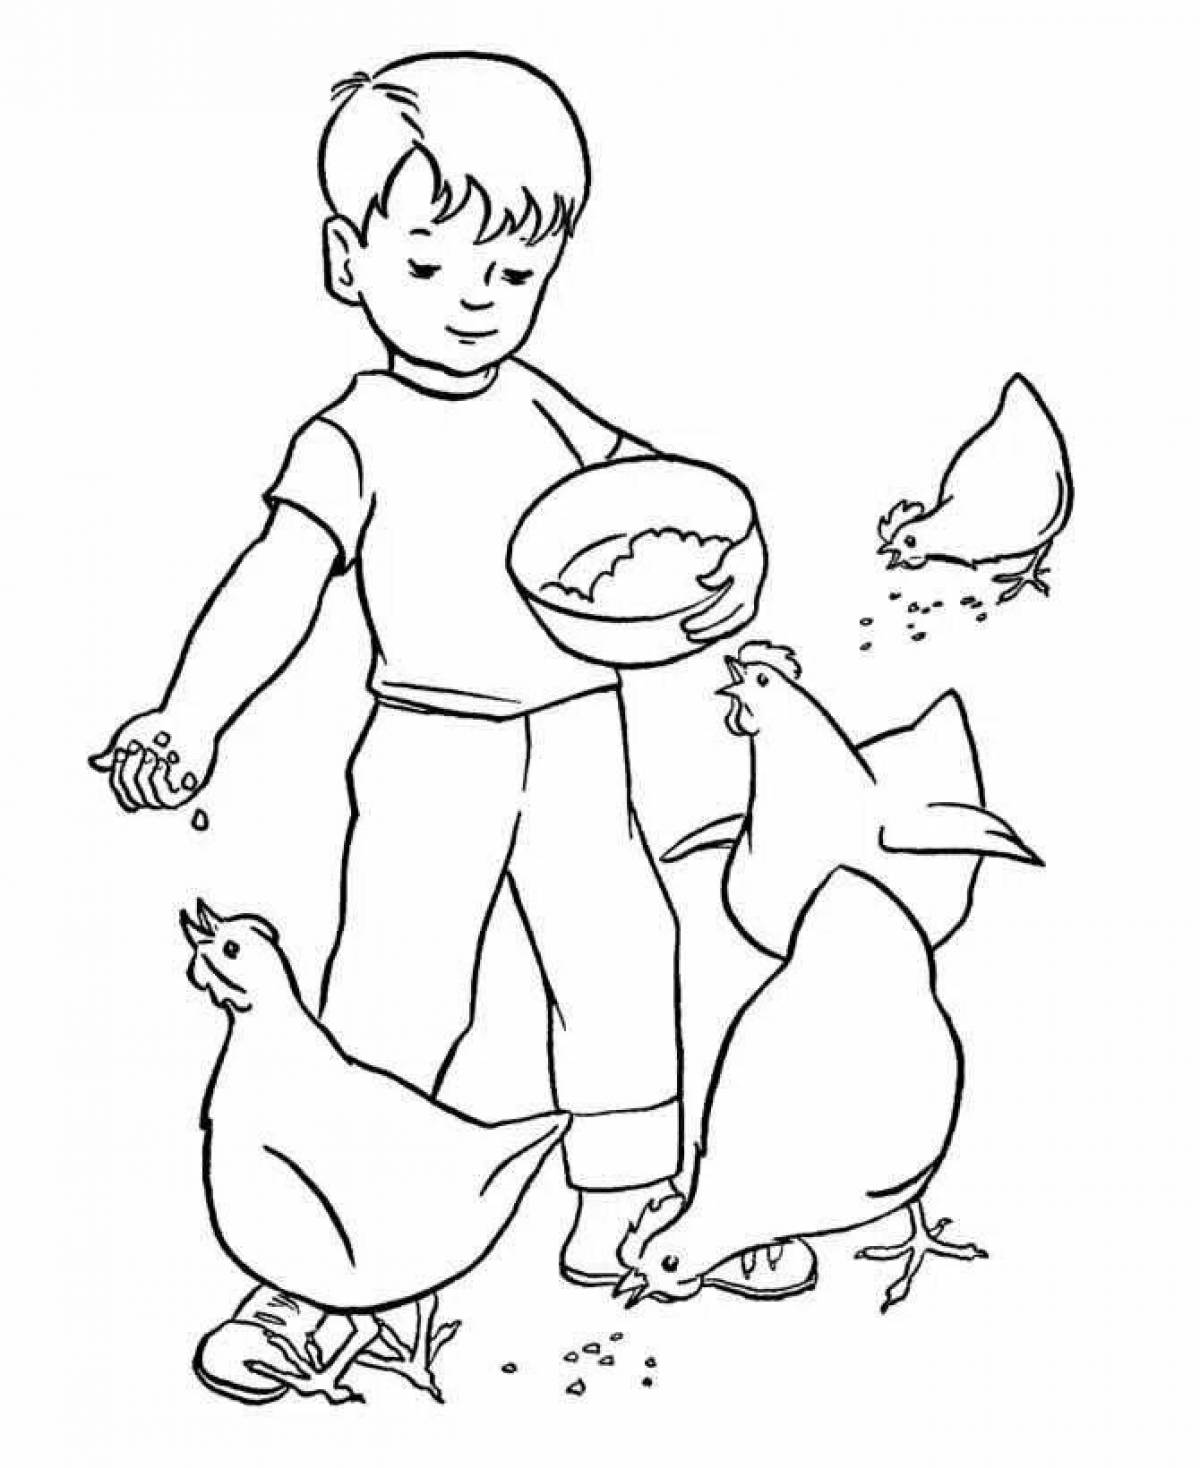 Coloring page great good deeds